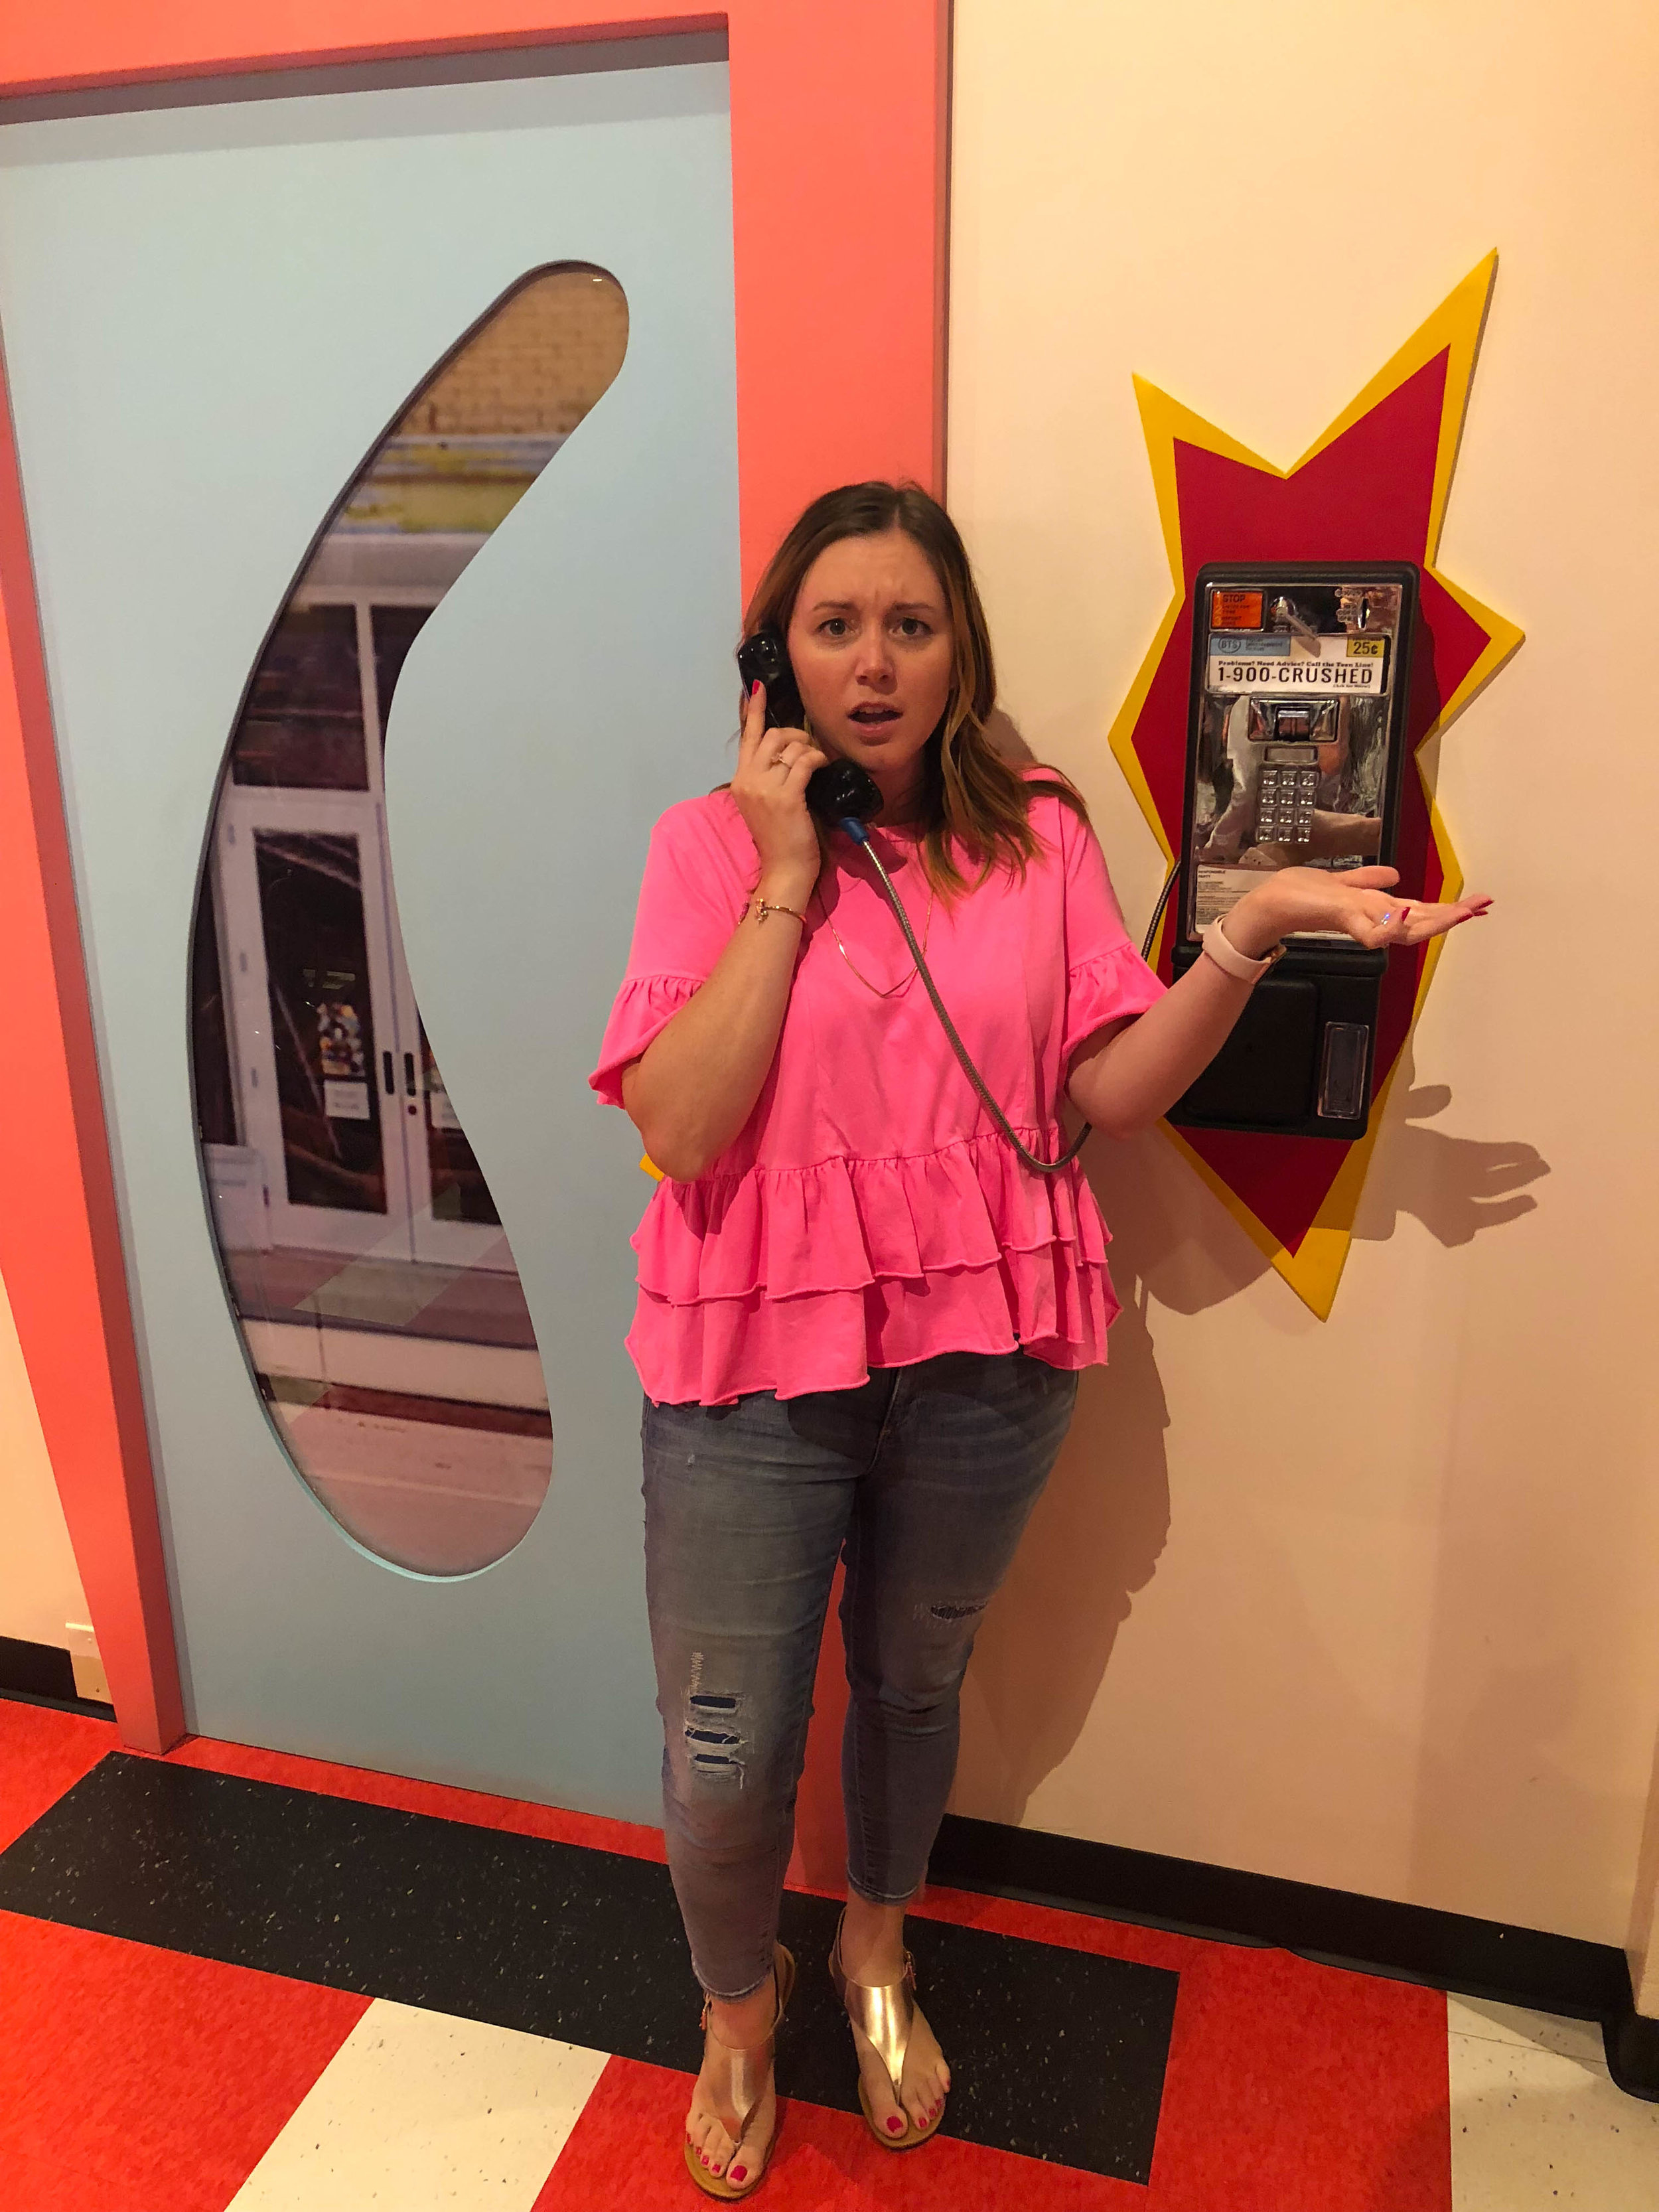 Saved By the Max - Saved by the Bell Pop-up Pay Phone